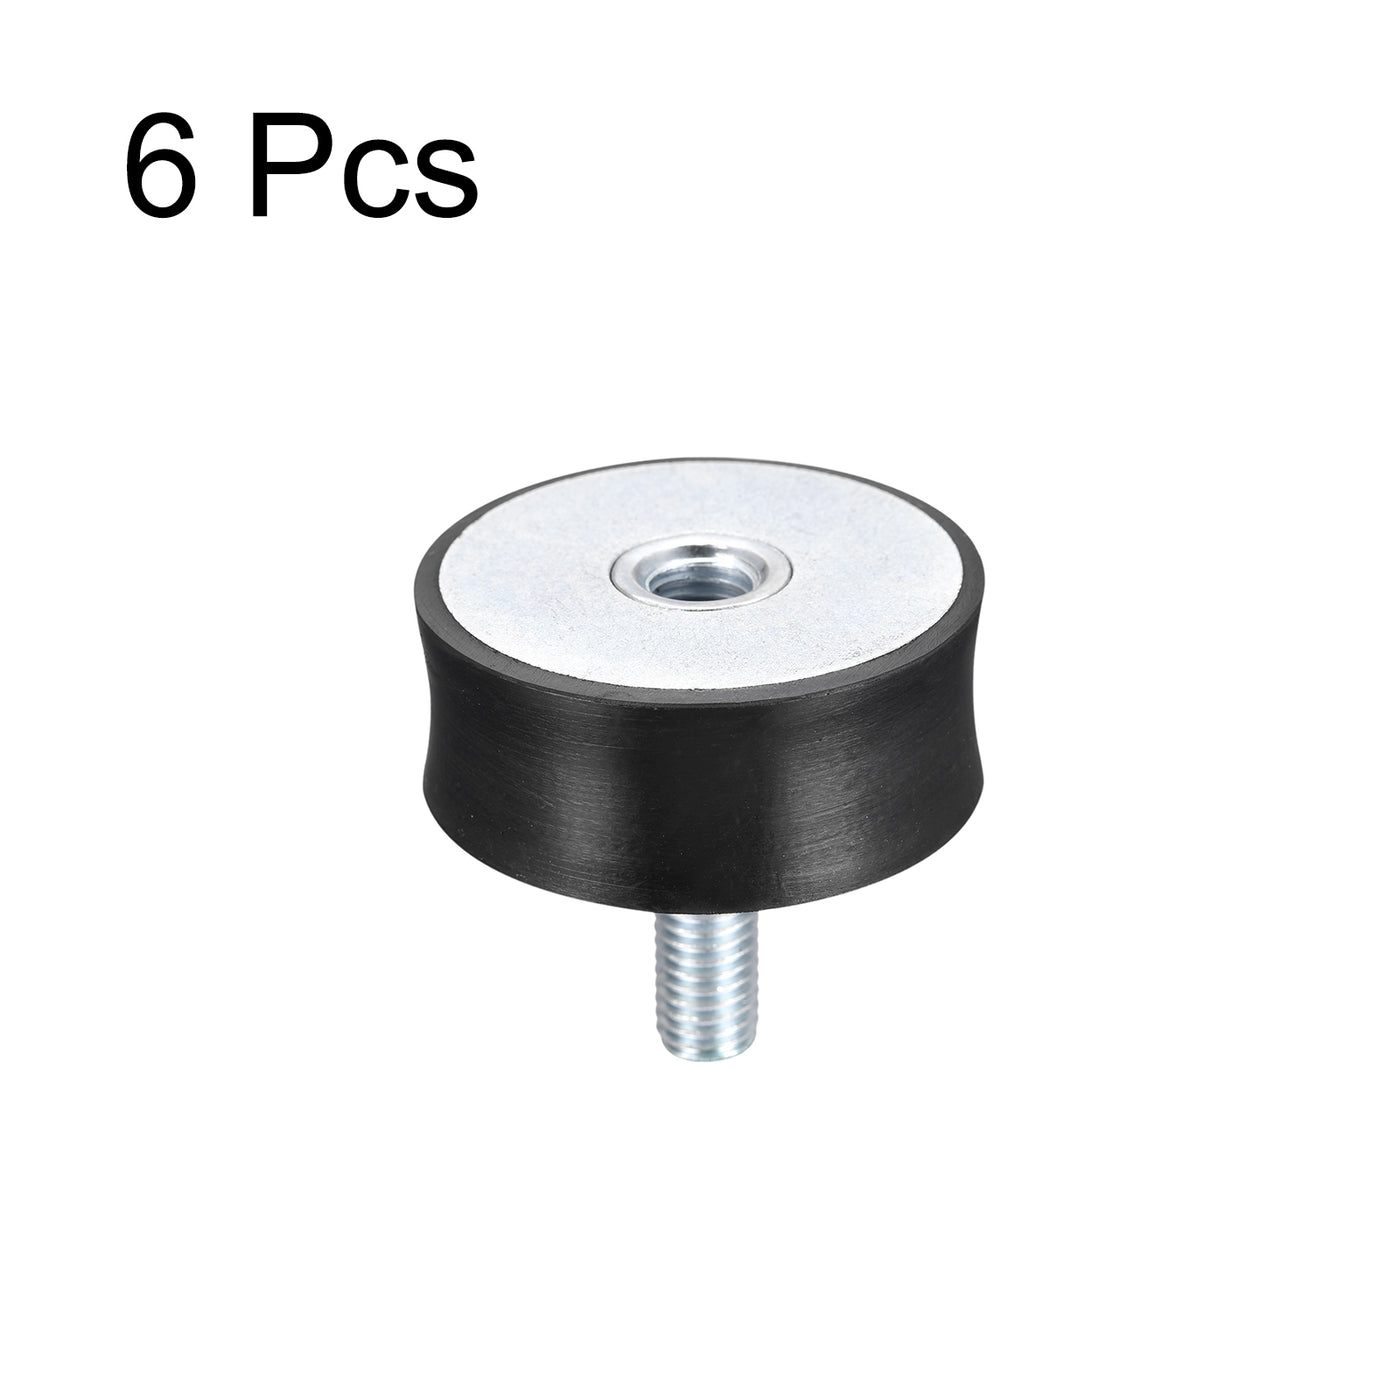 uxcell Uxcell Rubber Mount 6pcs M10 Male/Female Vibration Isolator Shock Absorber D50mmxH20mm